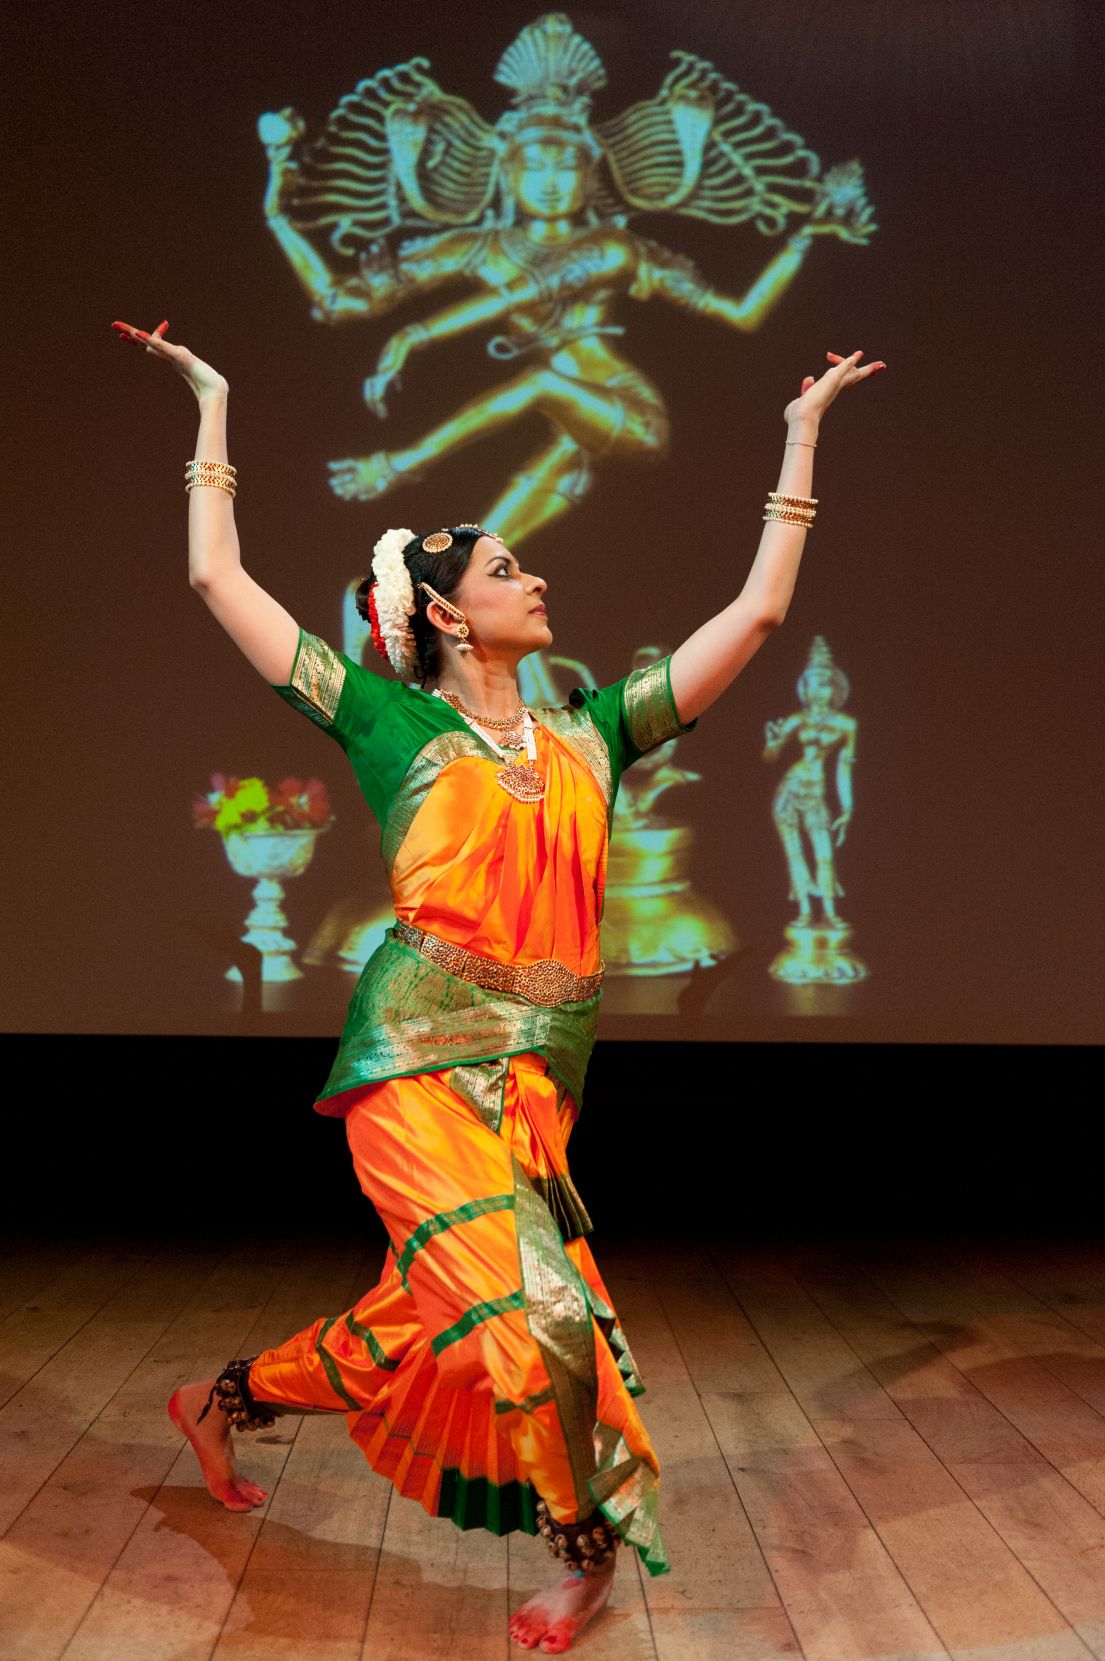 A woman in traditional orange and green Indian dress, flowers in her hair, dancing.